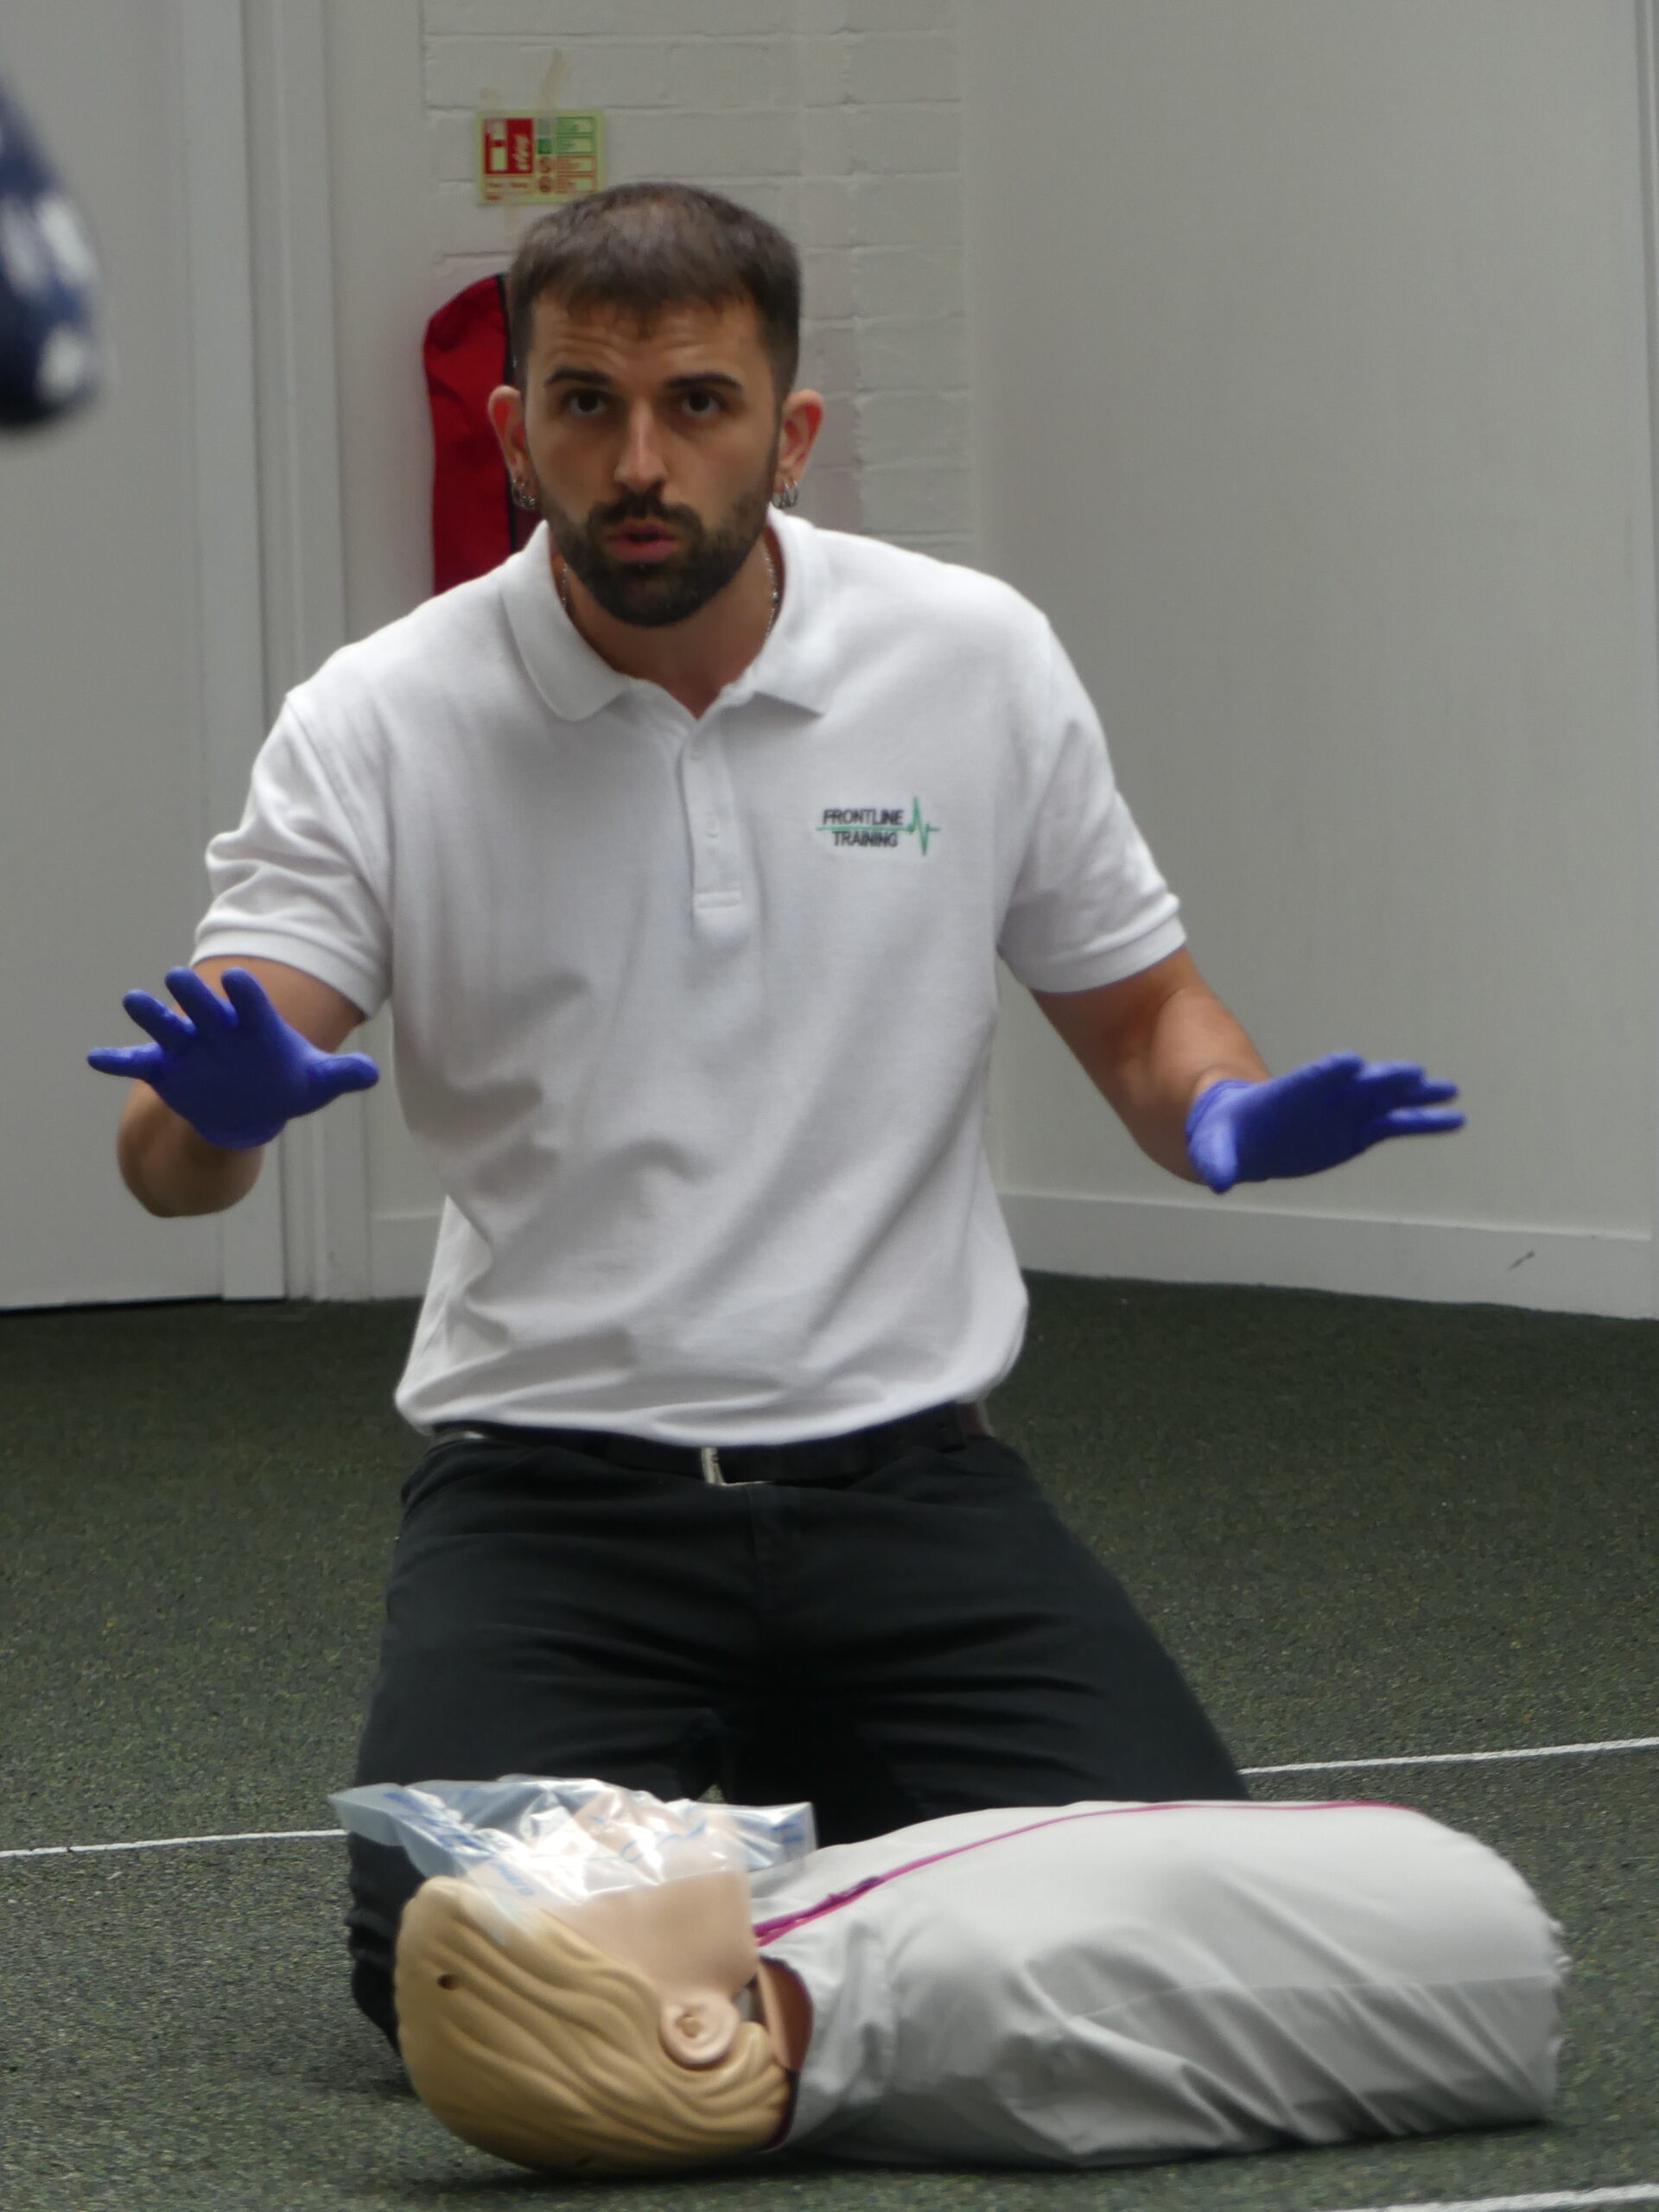 Frontline Training instructor demonstrating primary survey on a first aid course